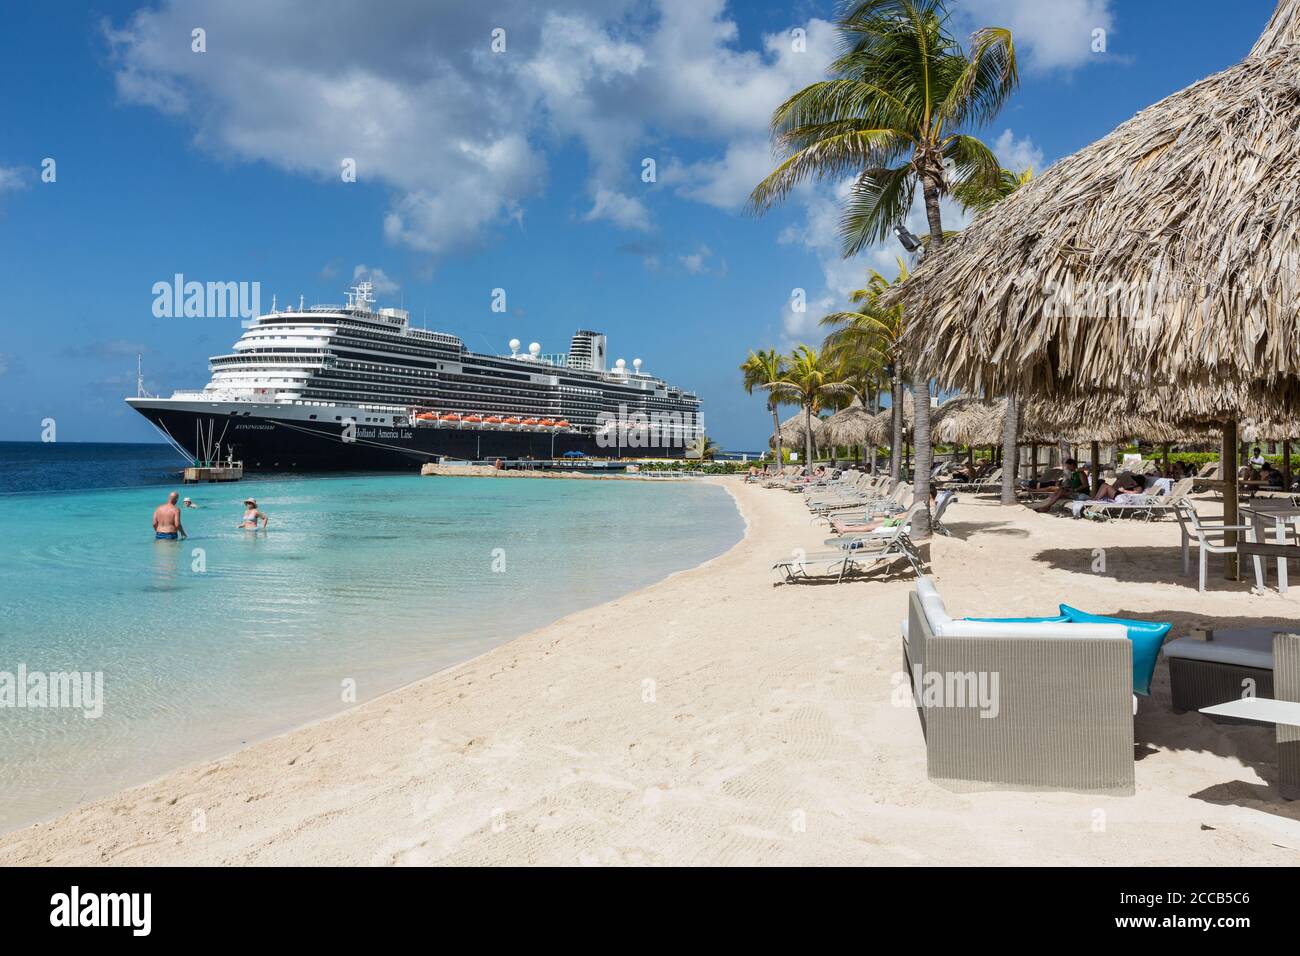 The Holland America Line cruise ship, Koningsdam, docked at Willemstad, the capital of the Caribbean island of Curacao in the Netherlands Antilles.  I Stock Photo